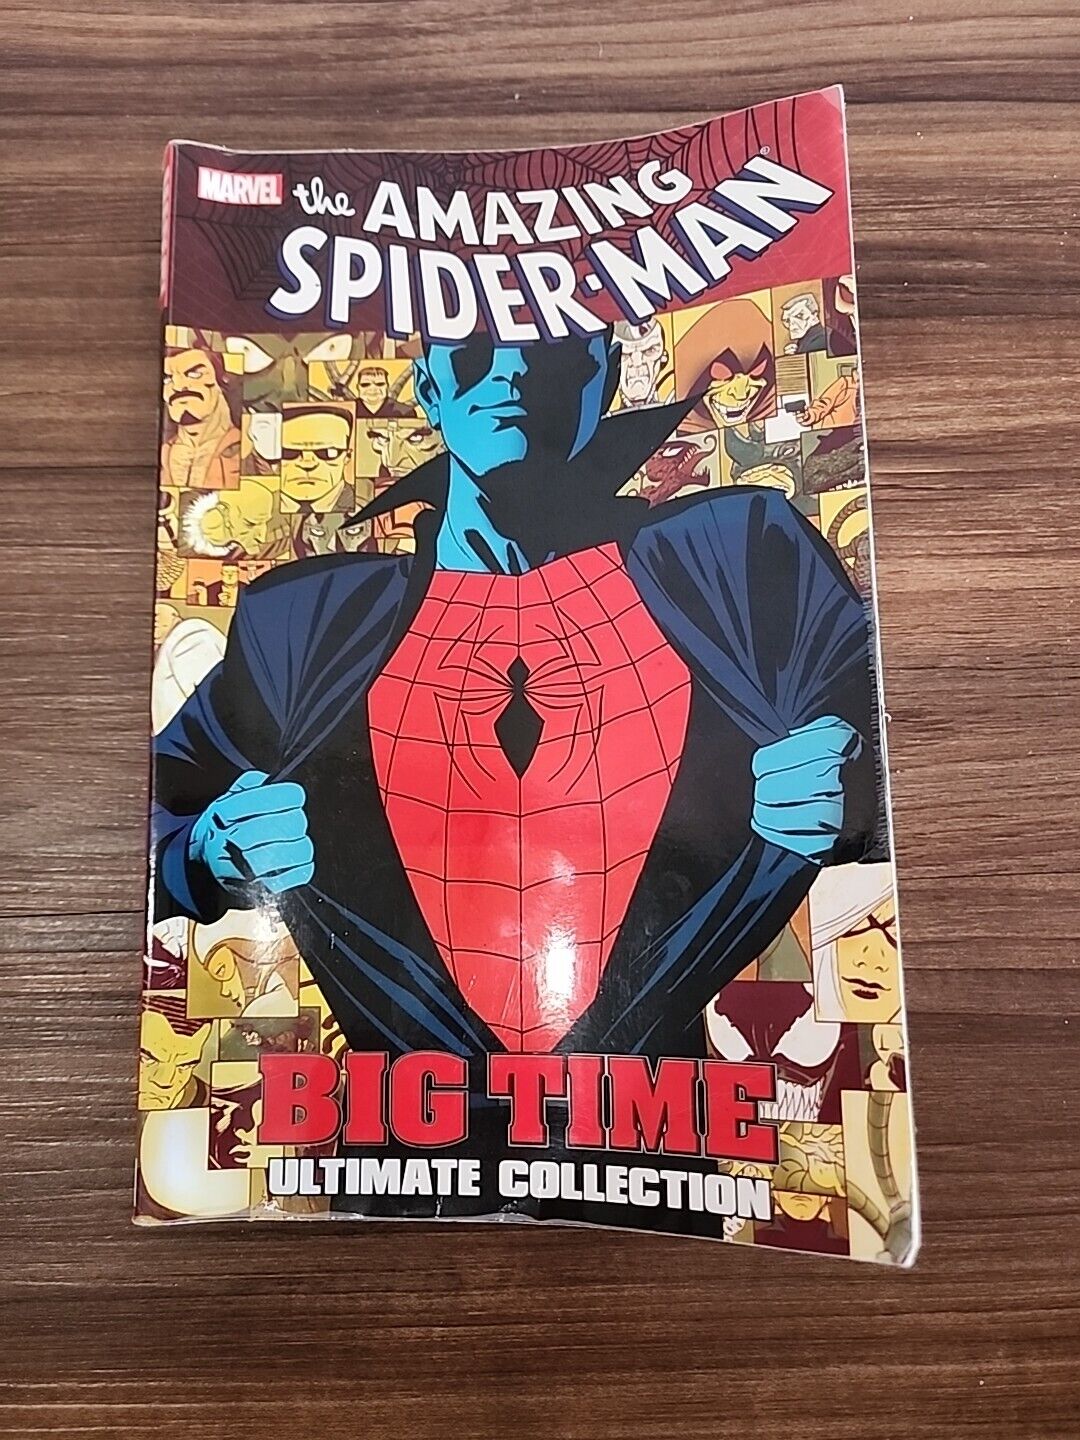 The Amazing Spiderman Big Time Ultimate Collection - Marvel - 2012